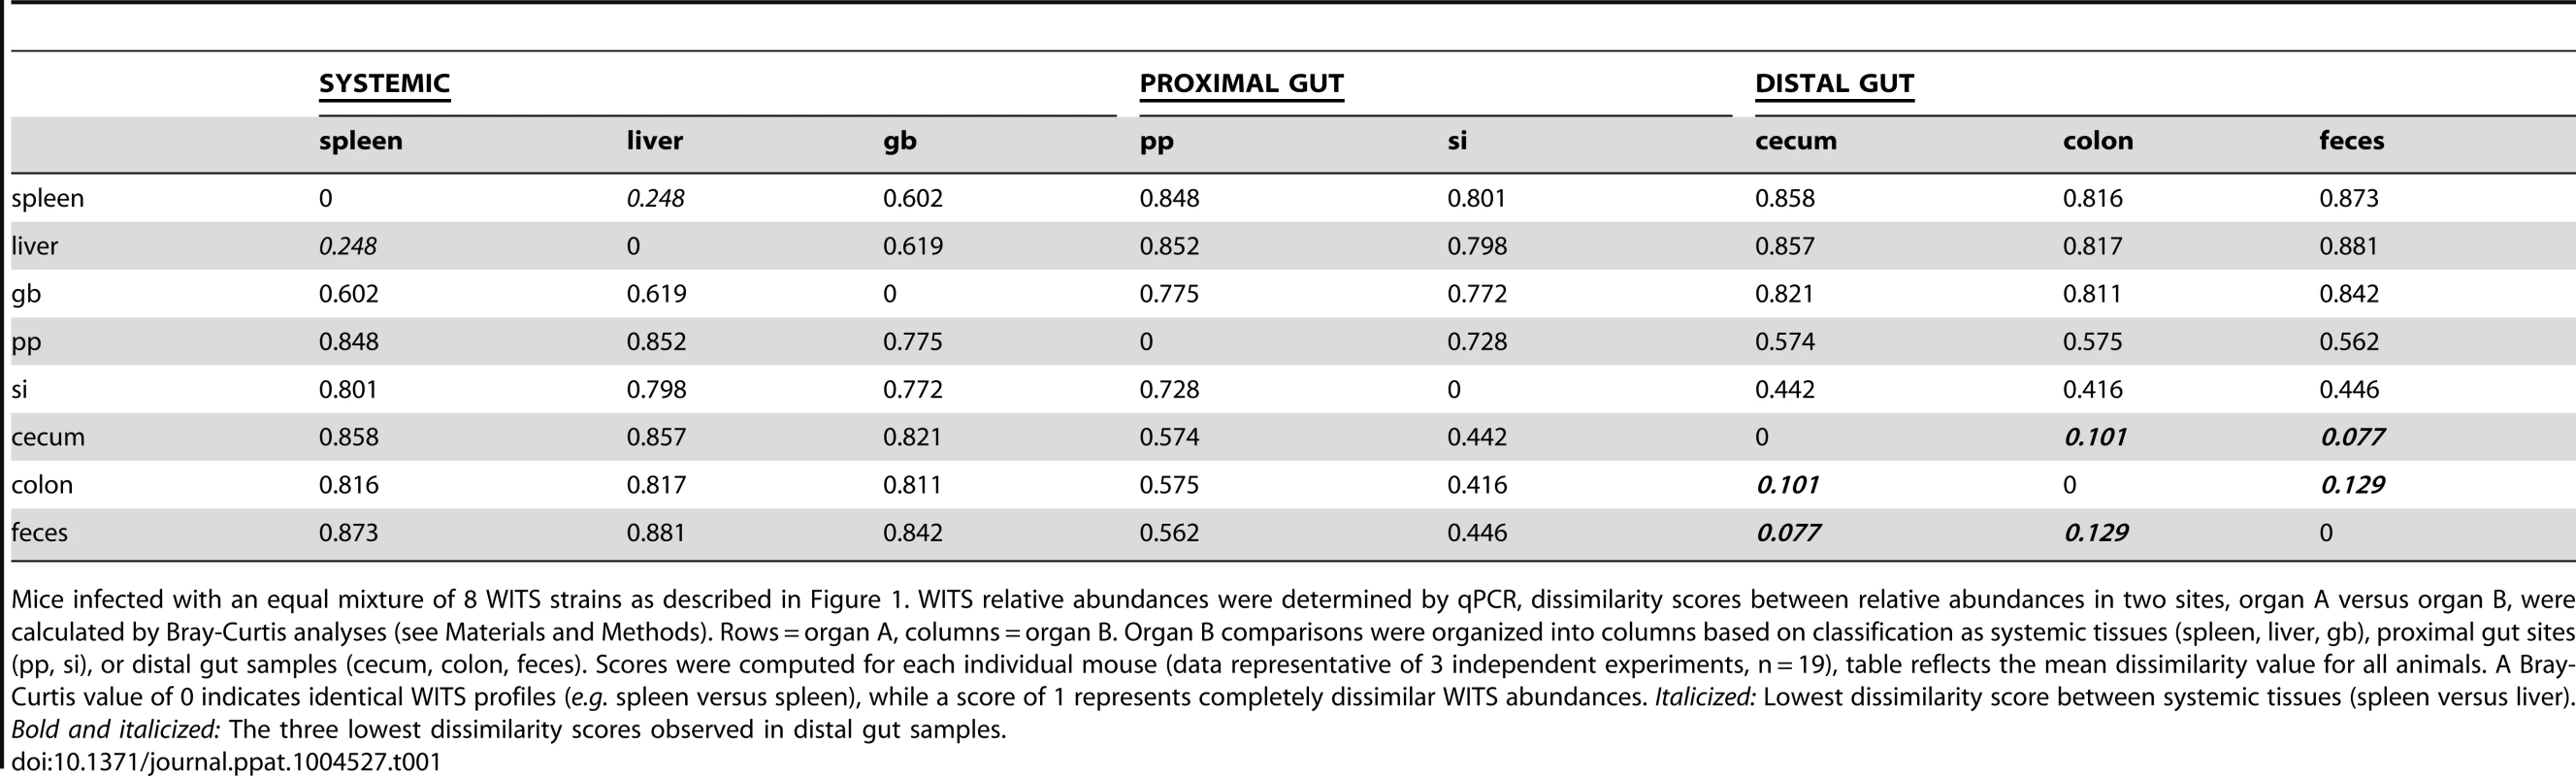 Bray-Curtis dissimilarity values of WITS relative abundances within murine tissues during persistent infection.